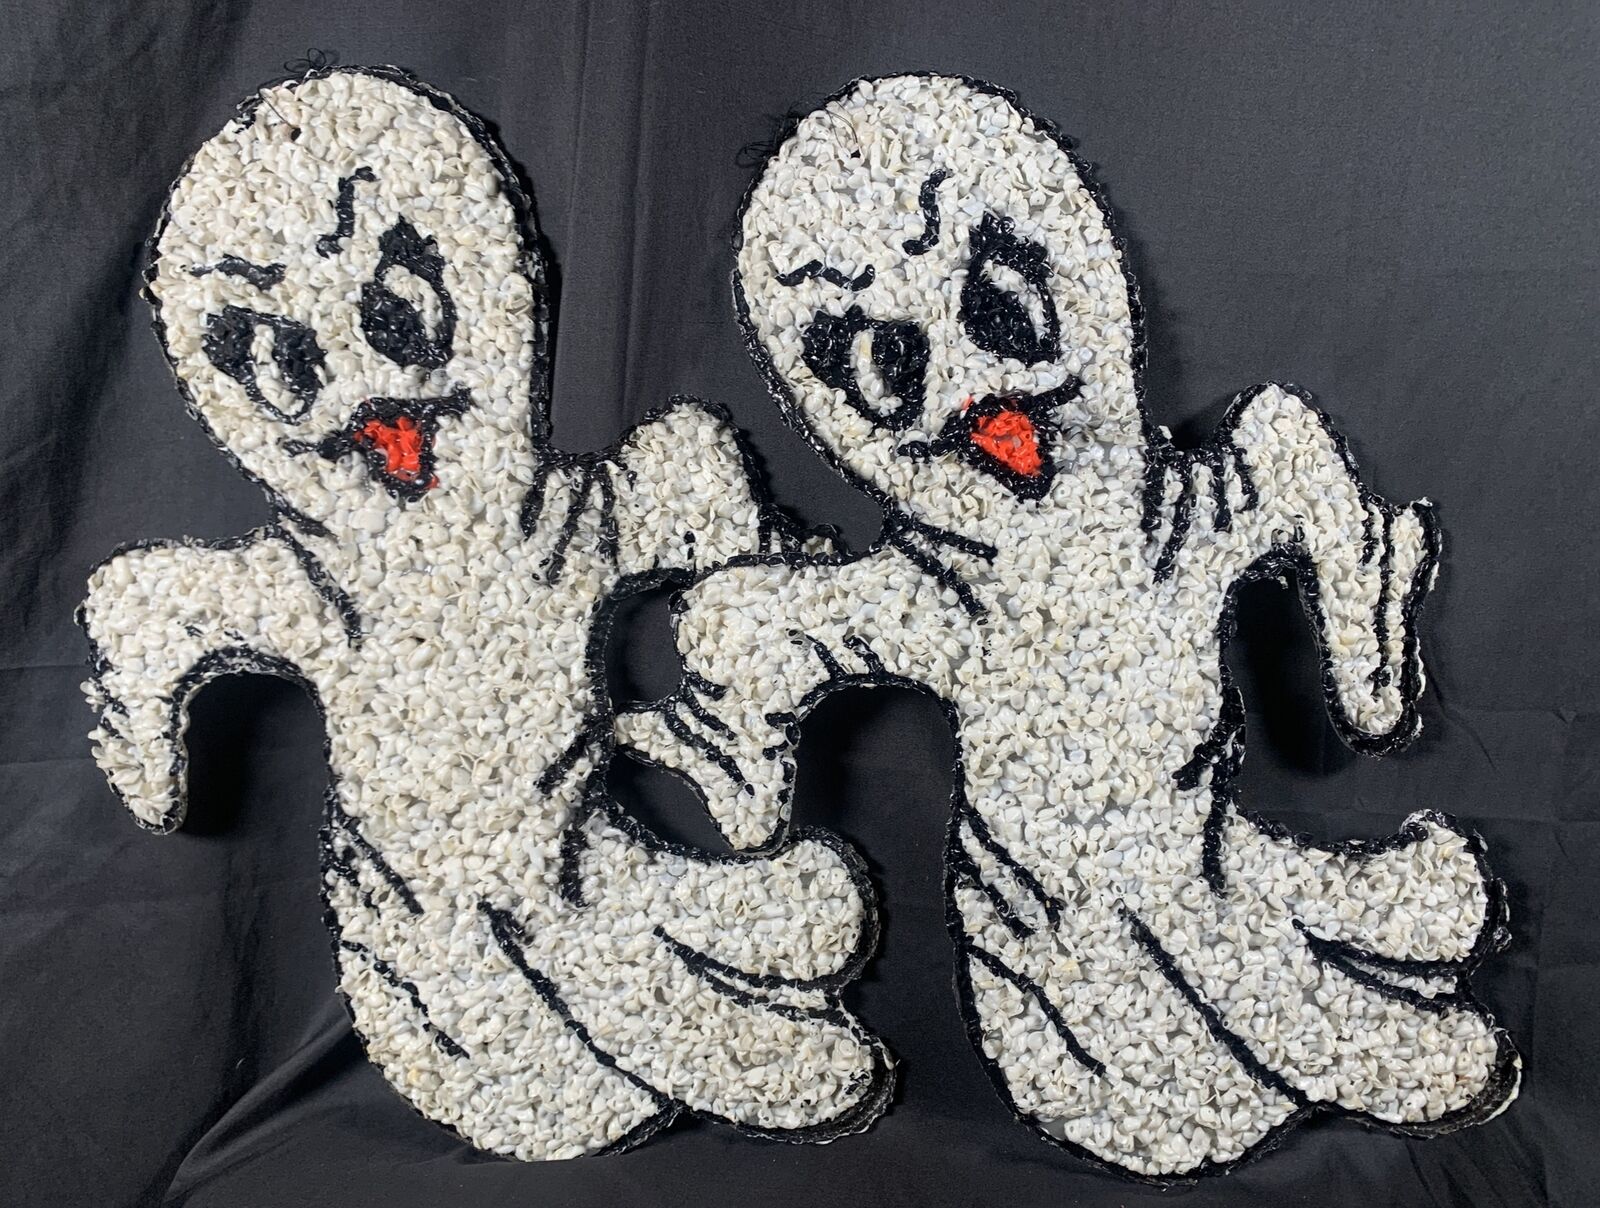 ✨Lot Of 2- Vintage Melted Plastic Popcorn Ghost Halloween Decor 19”H x 15”W✨